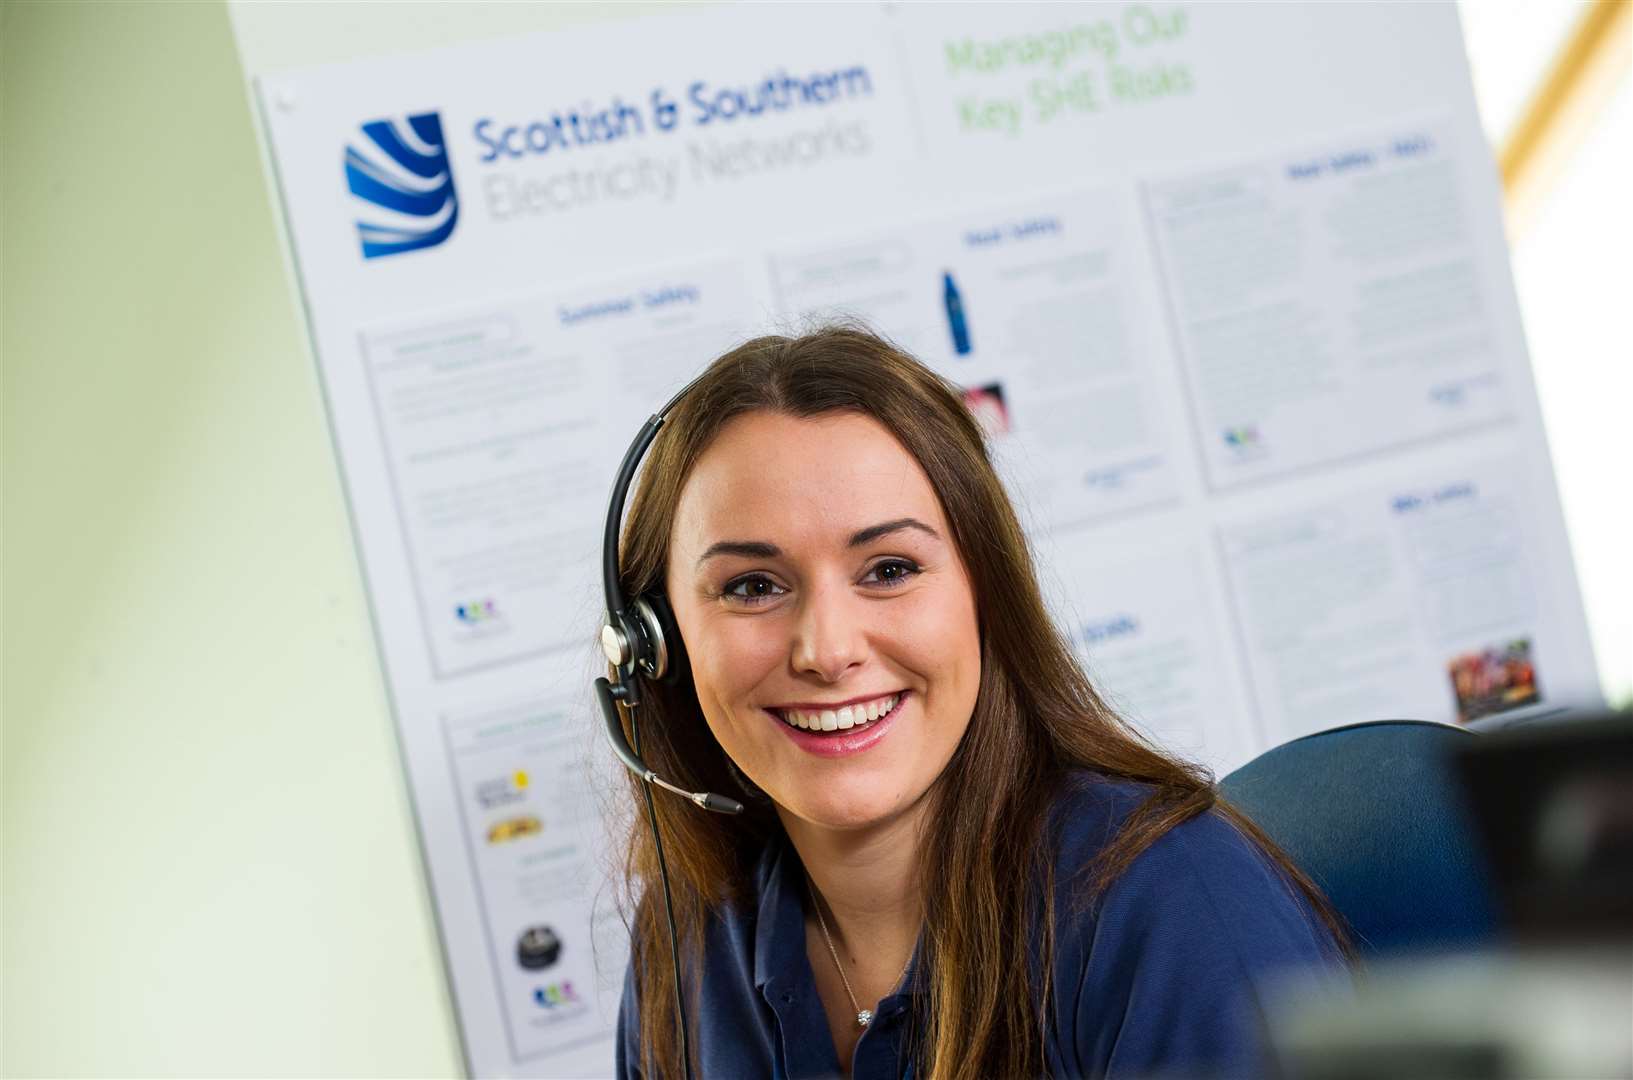 A dedicated team from Scottish and Southern Electricity Networks is contacting customers who may be at risk of social isolation during the lockdown period. Picture: stuartnicolphotography.com